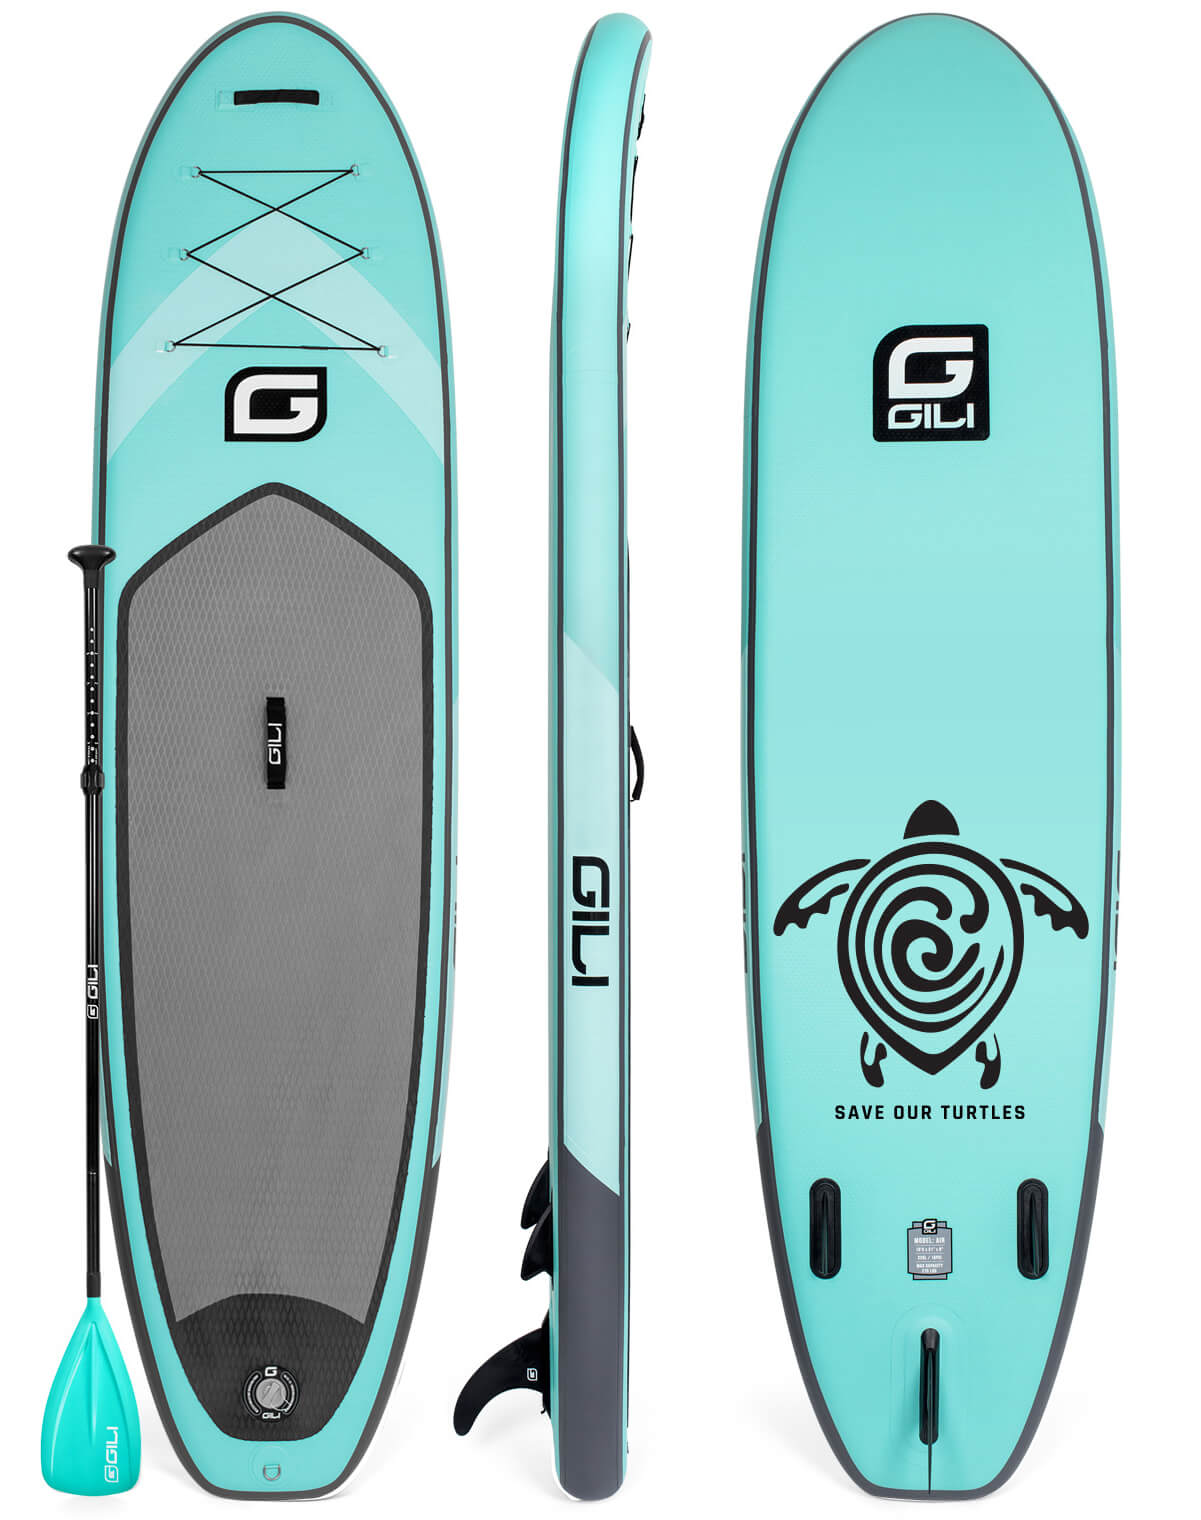 GILI 10'6 AIR Inflatable Paddle Board Save The Turtles